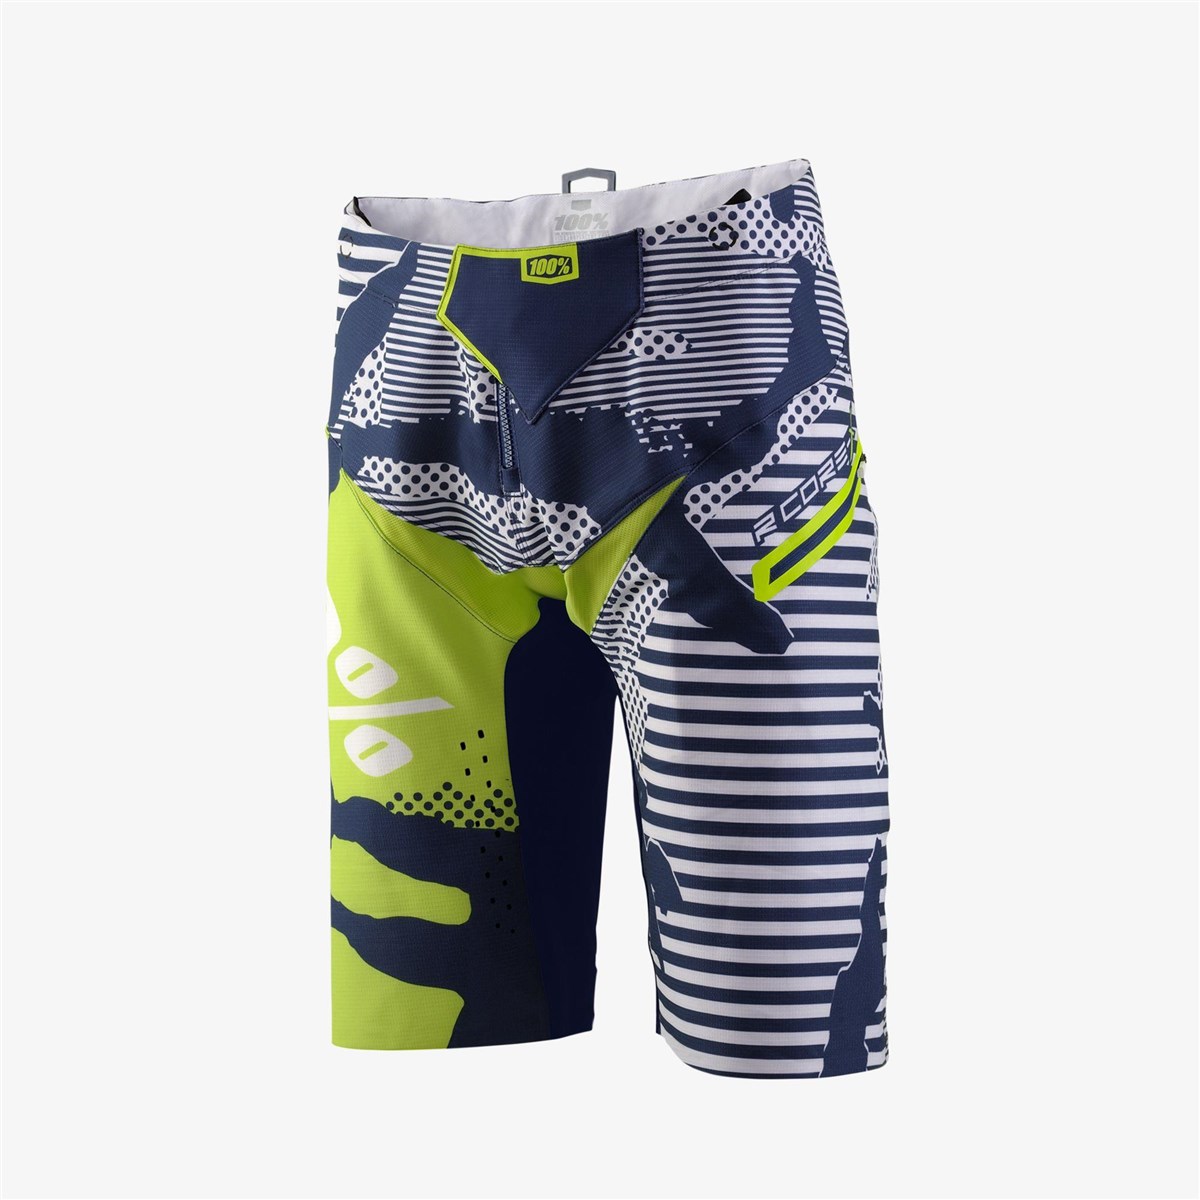 100% R-Core X DH Shorts product image